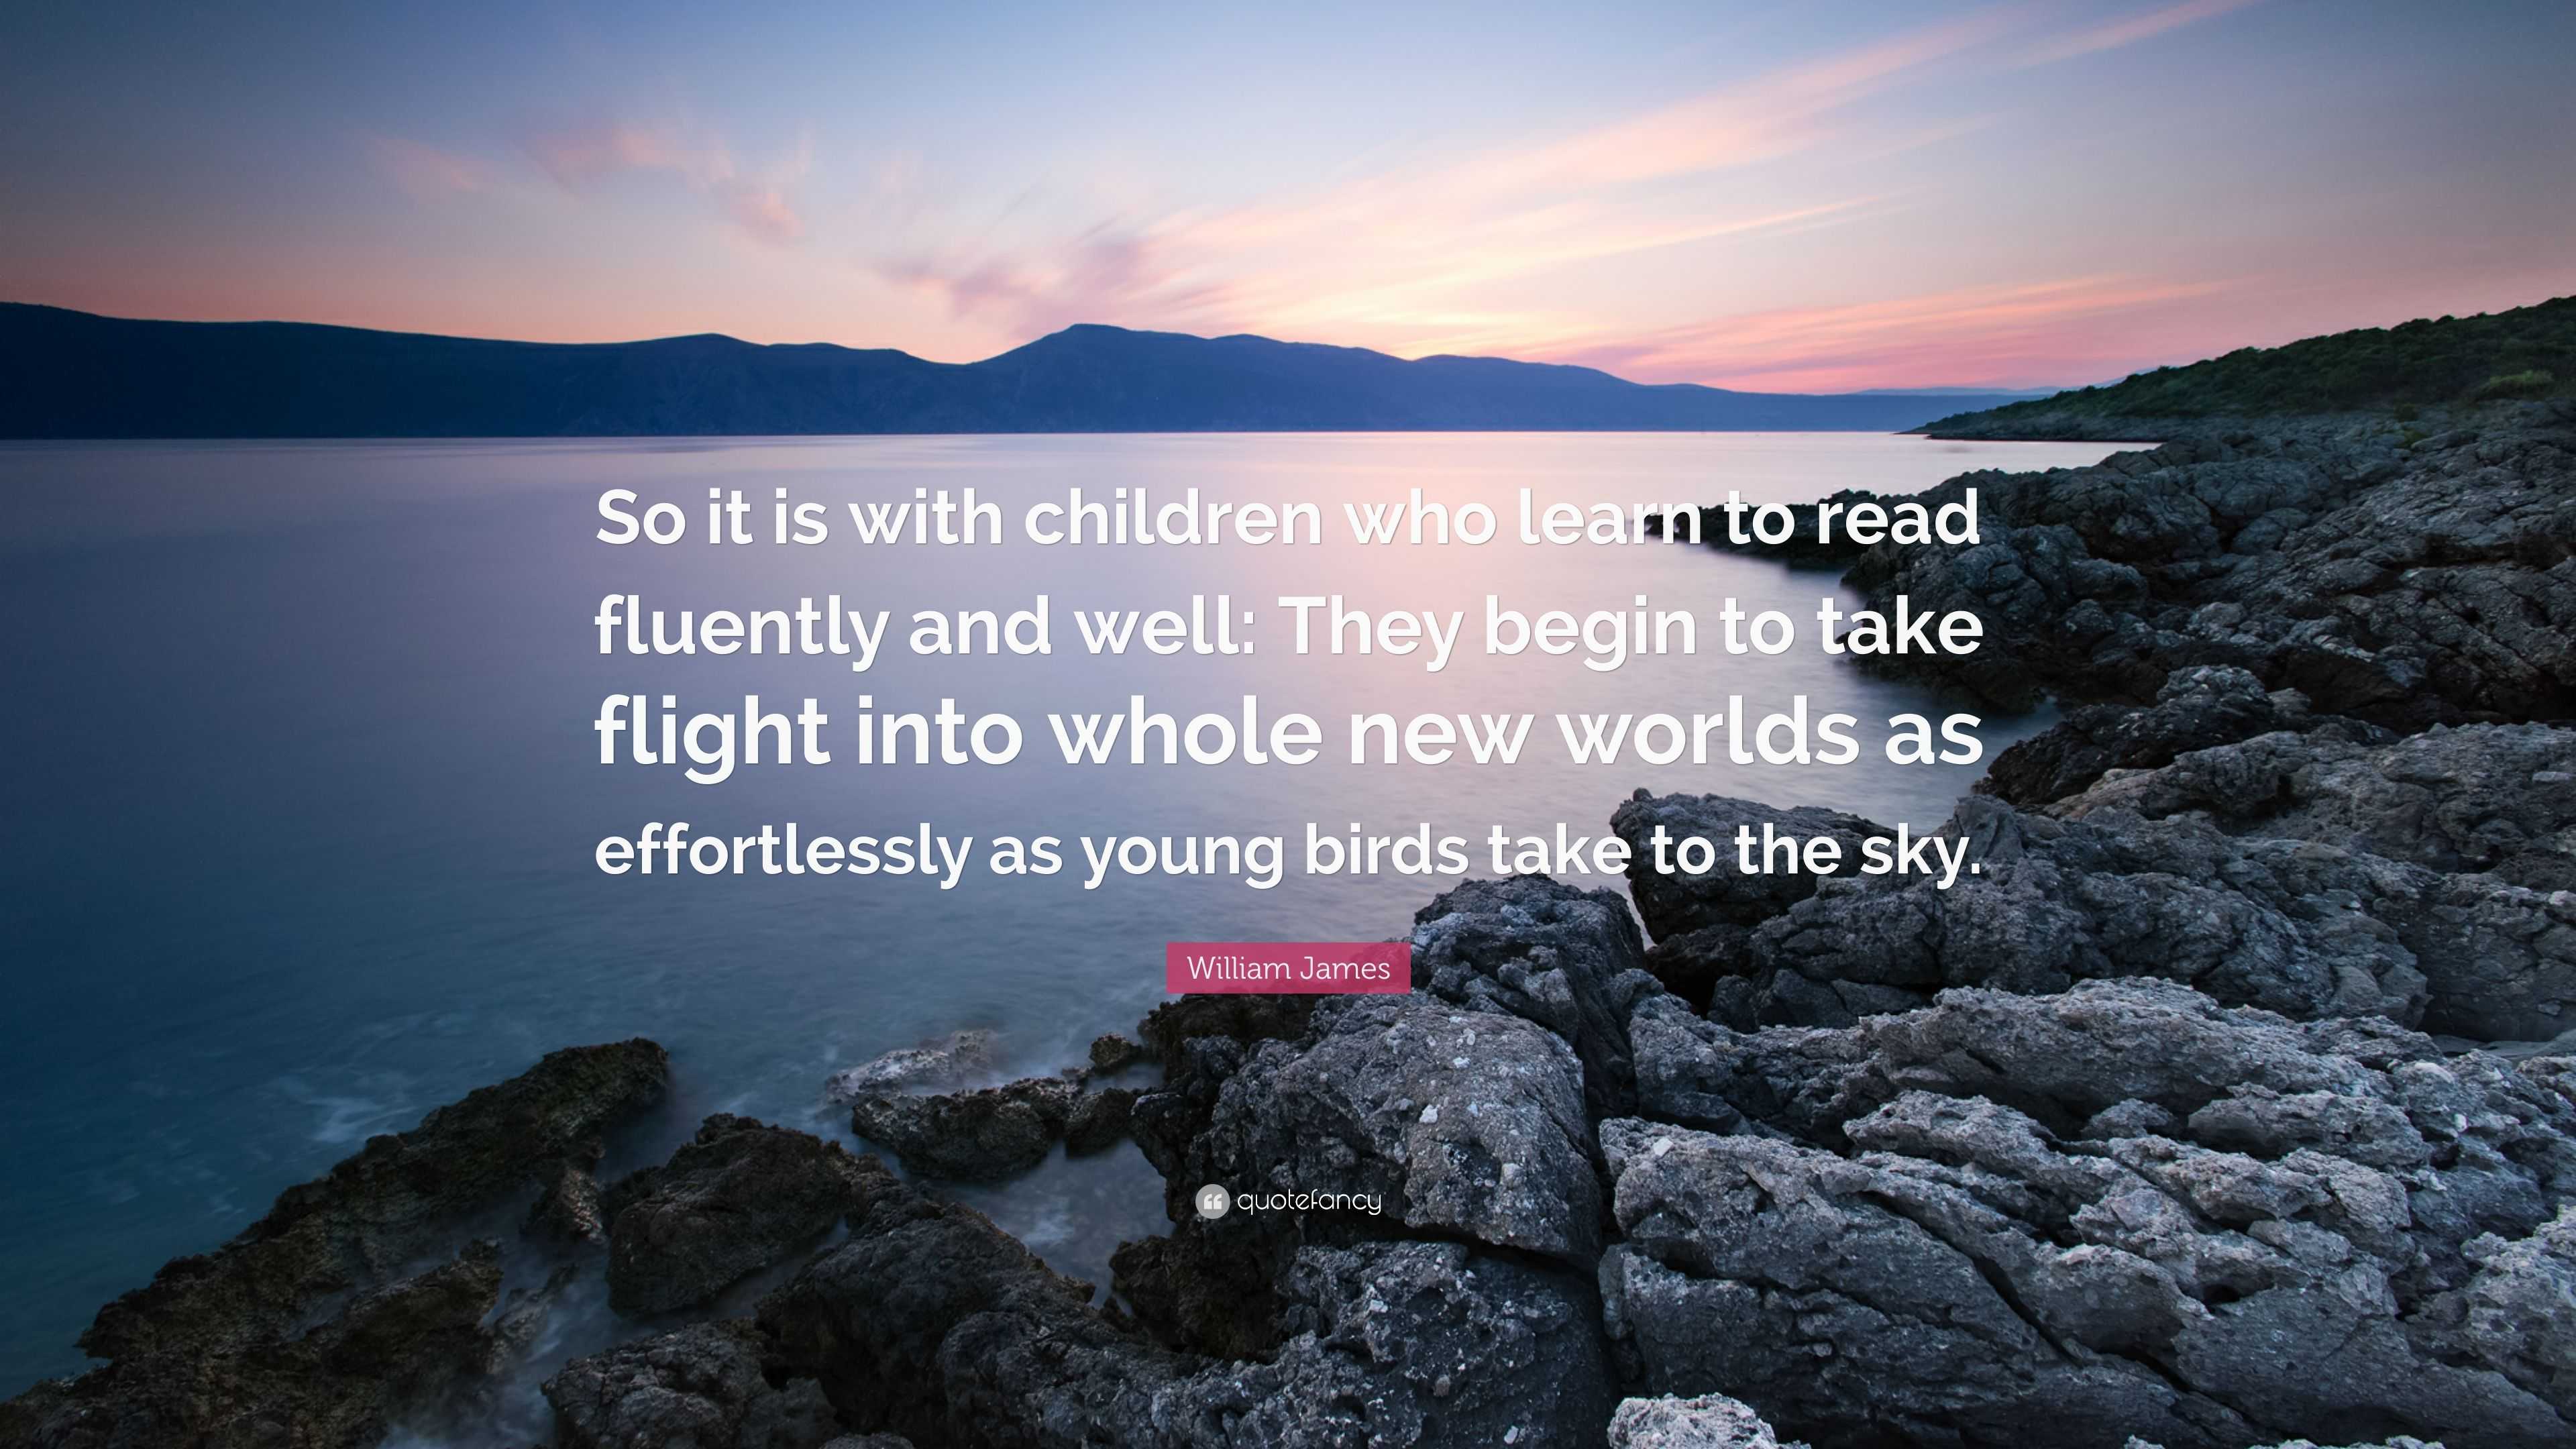 William James Quote: “So it is with children who learn to read fluently and  well: They begin to take flight into whole new worlds as effortles...”